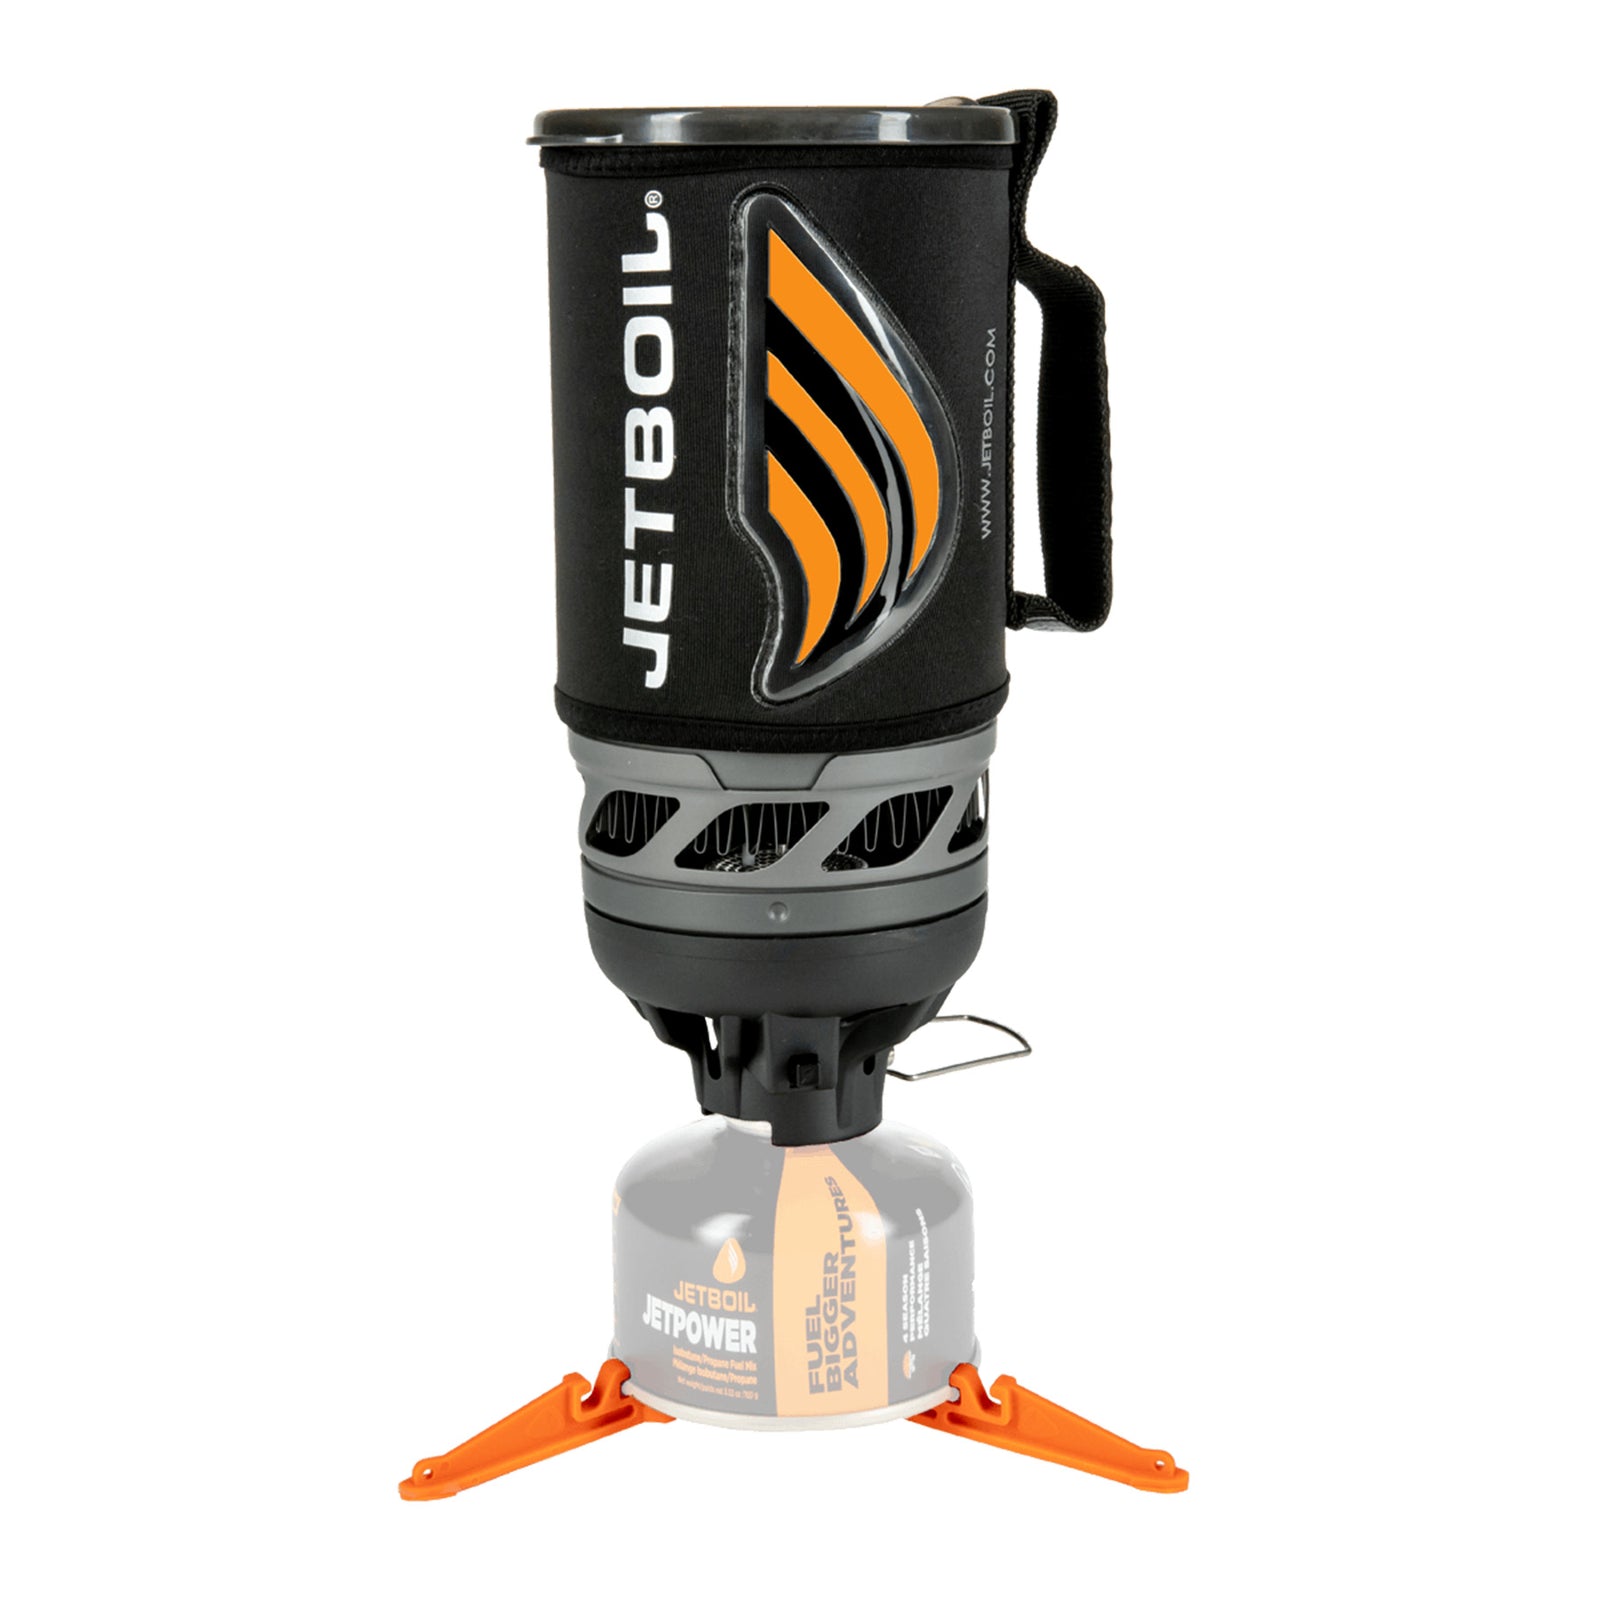 jetboil set up on a fuel can 